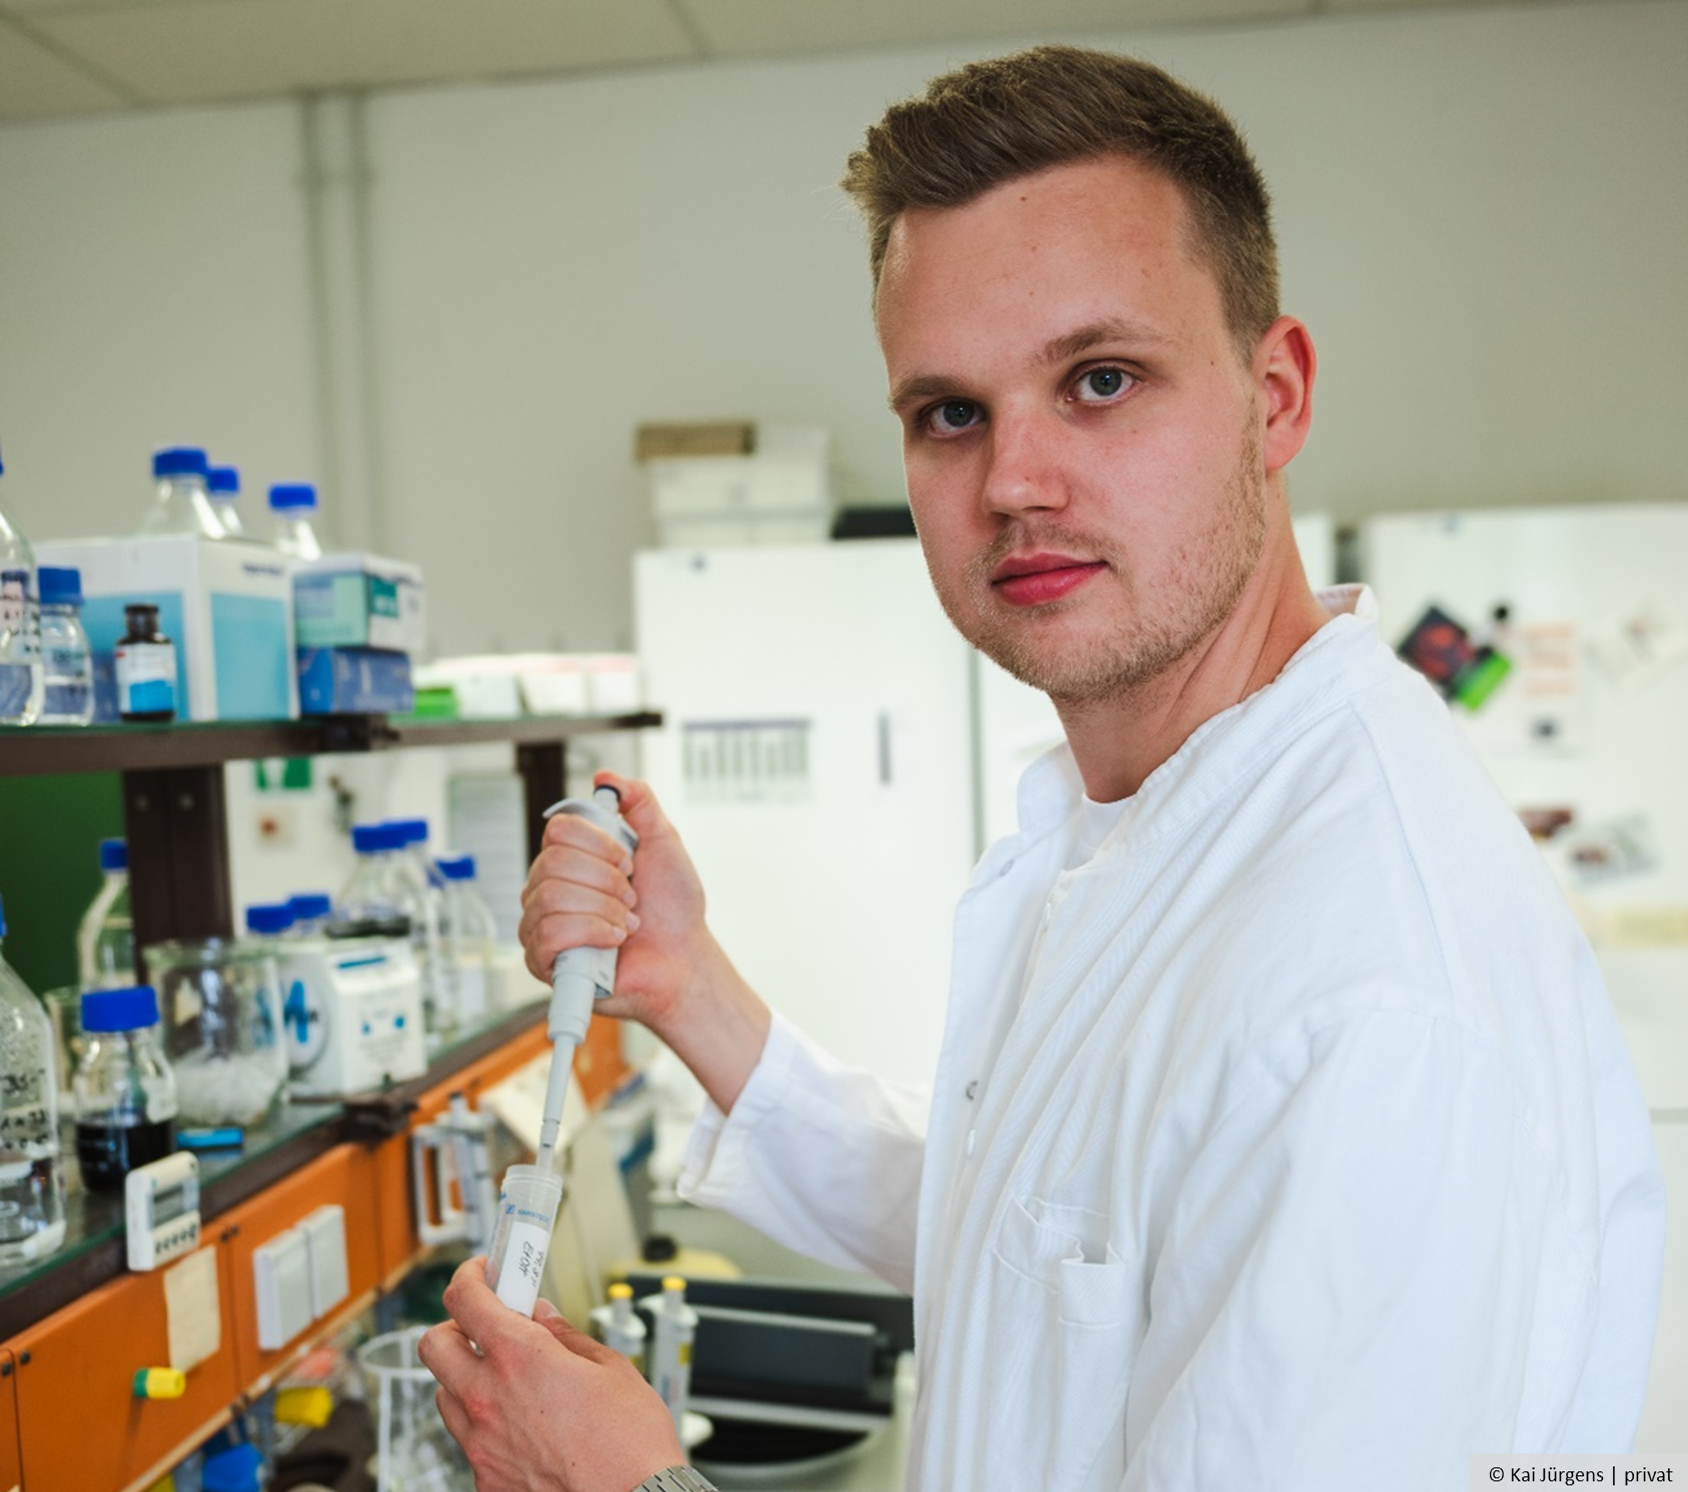 A man stands in the laboratory holding a pipette